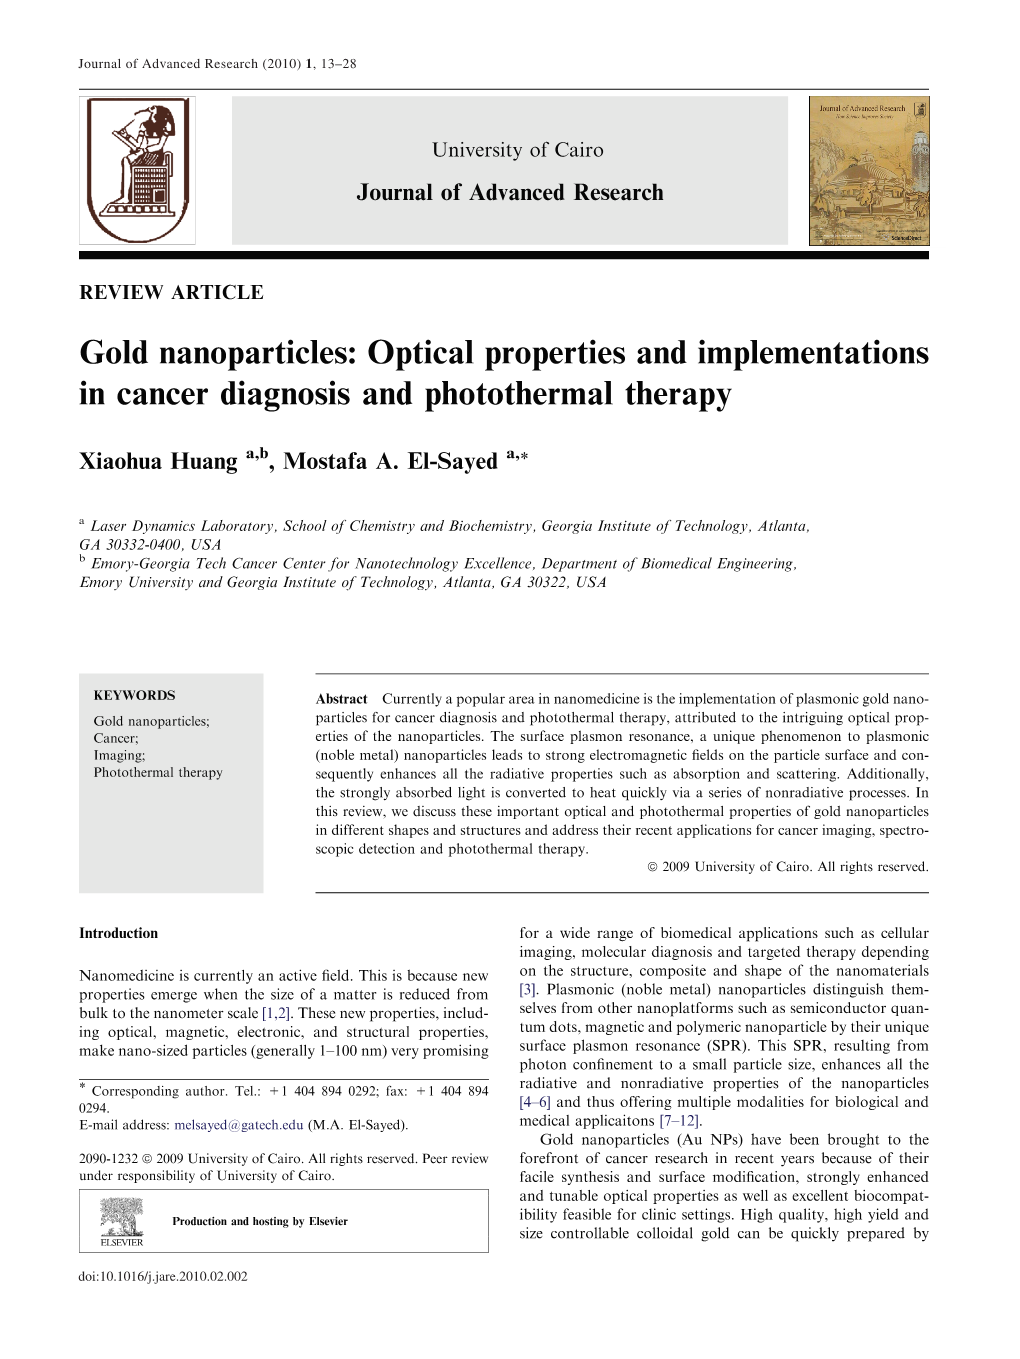 Gold Nanoparticles: Optical Properties and Implementations in Cancer Diagnosis and Photothermal Therapy